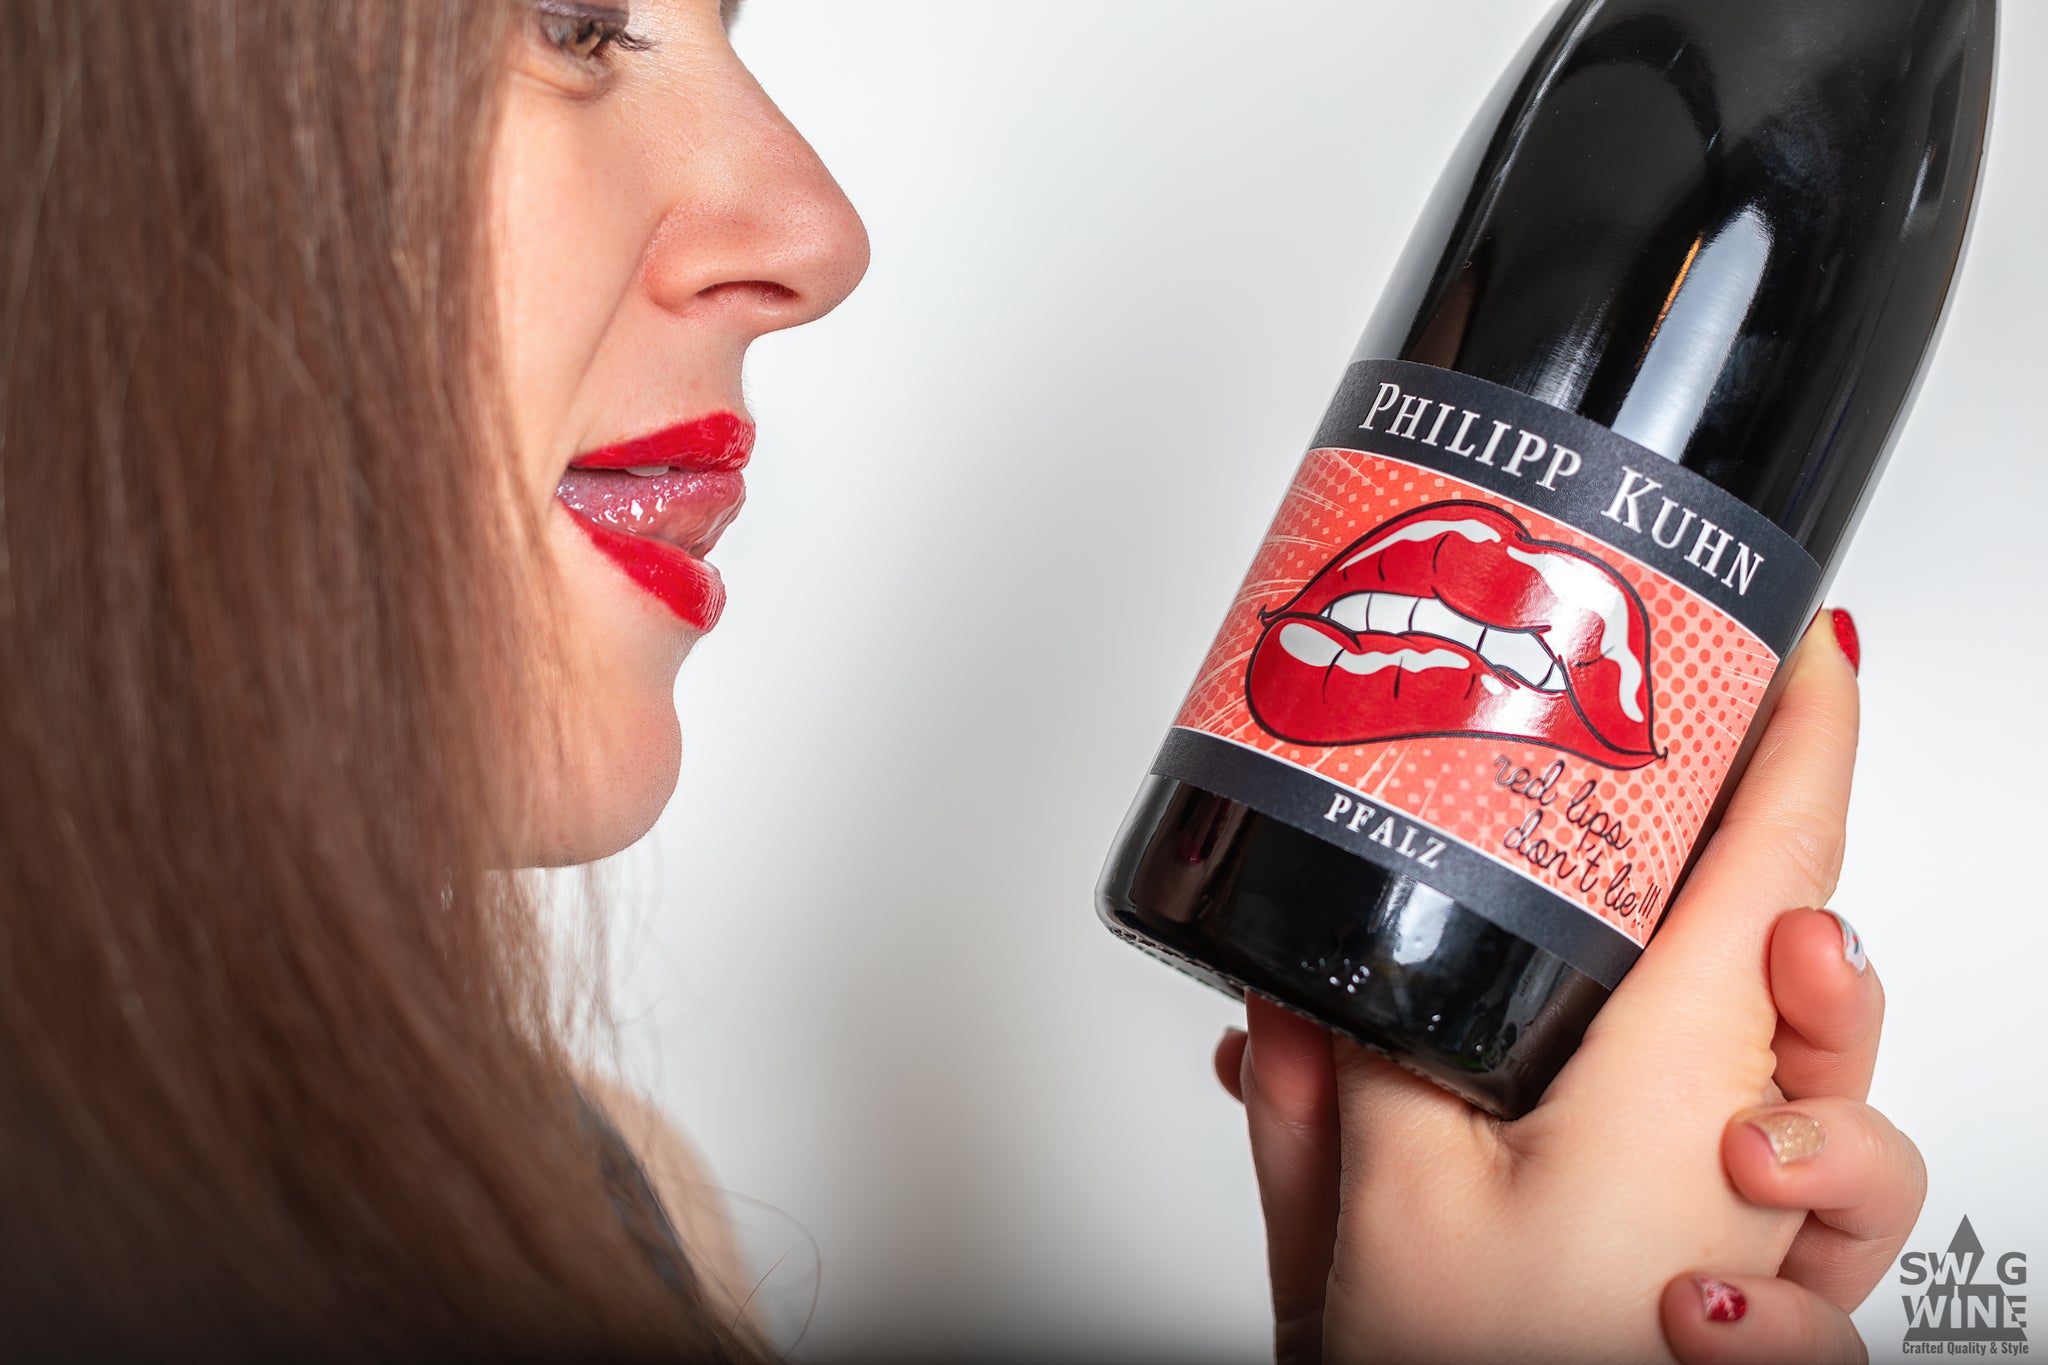 Philipp Kuhn Red Lips don't lie Pfalz Rotwein Bordeaux Blend Swagwine Rote Lippen